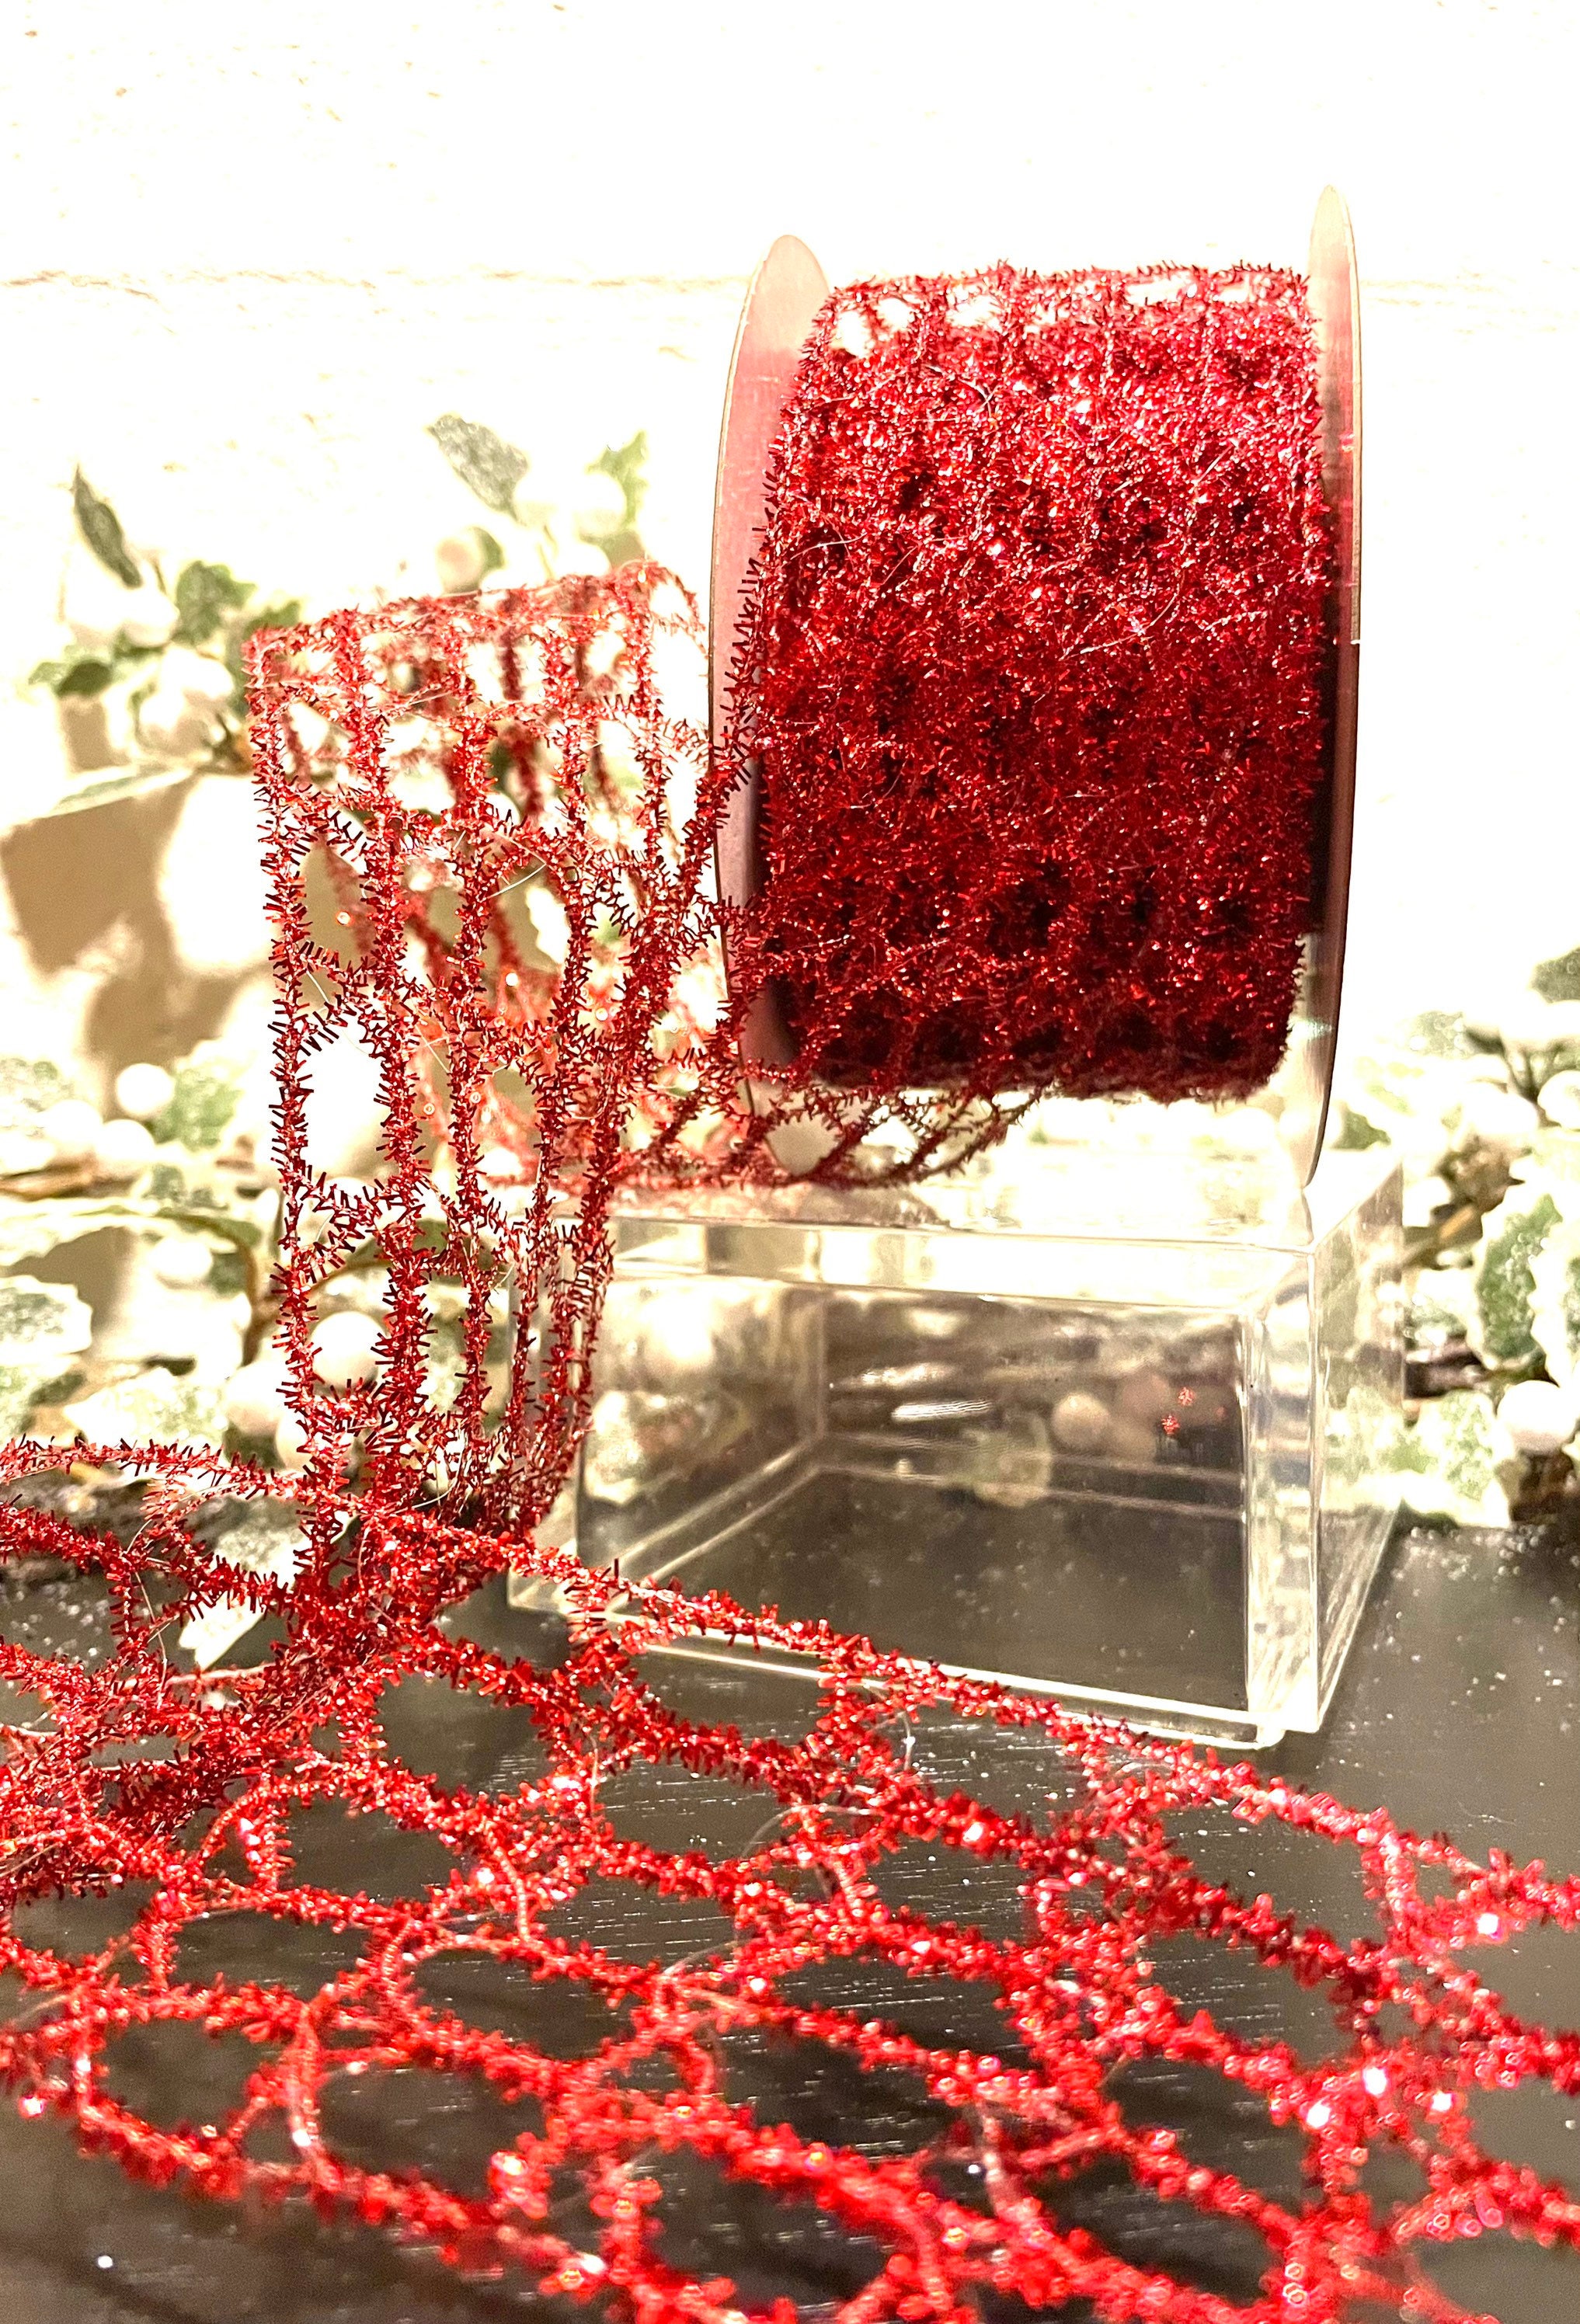  eZthings® Decorative Designer Sparkly Sheer Fabric Ribbons for  Party Decor and Gift Baskets (10 Yard, Red(3.5 Width))